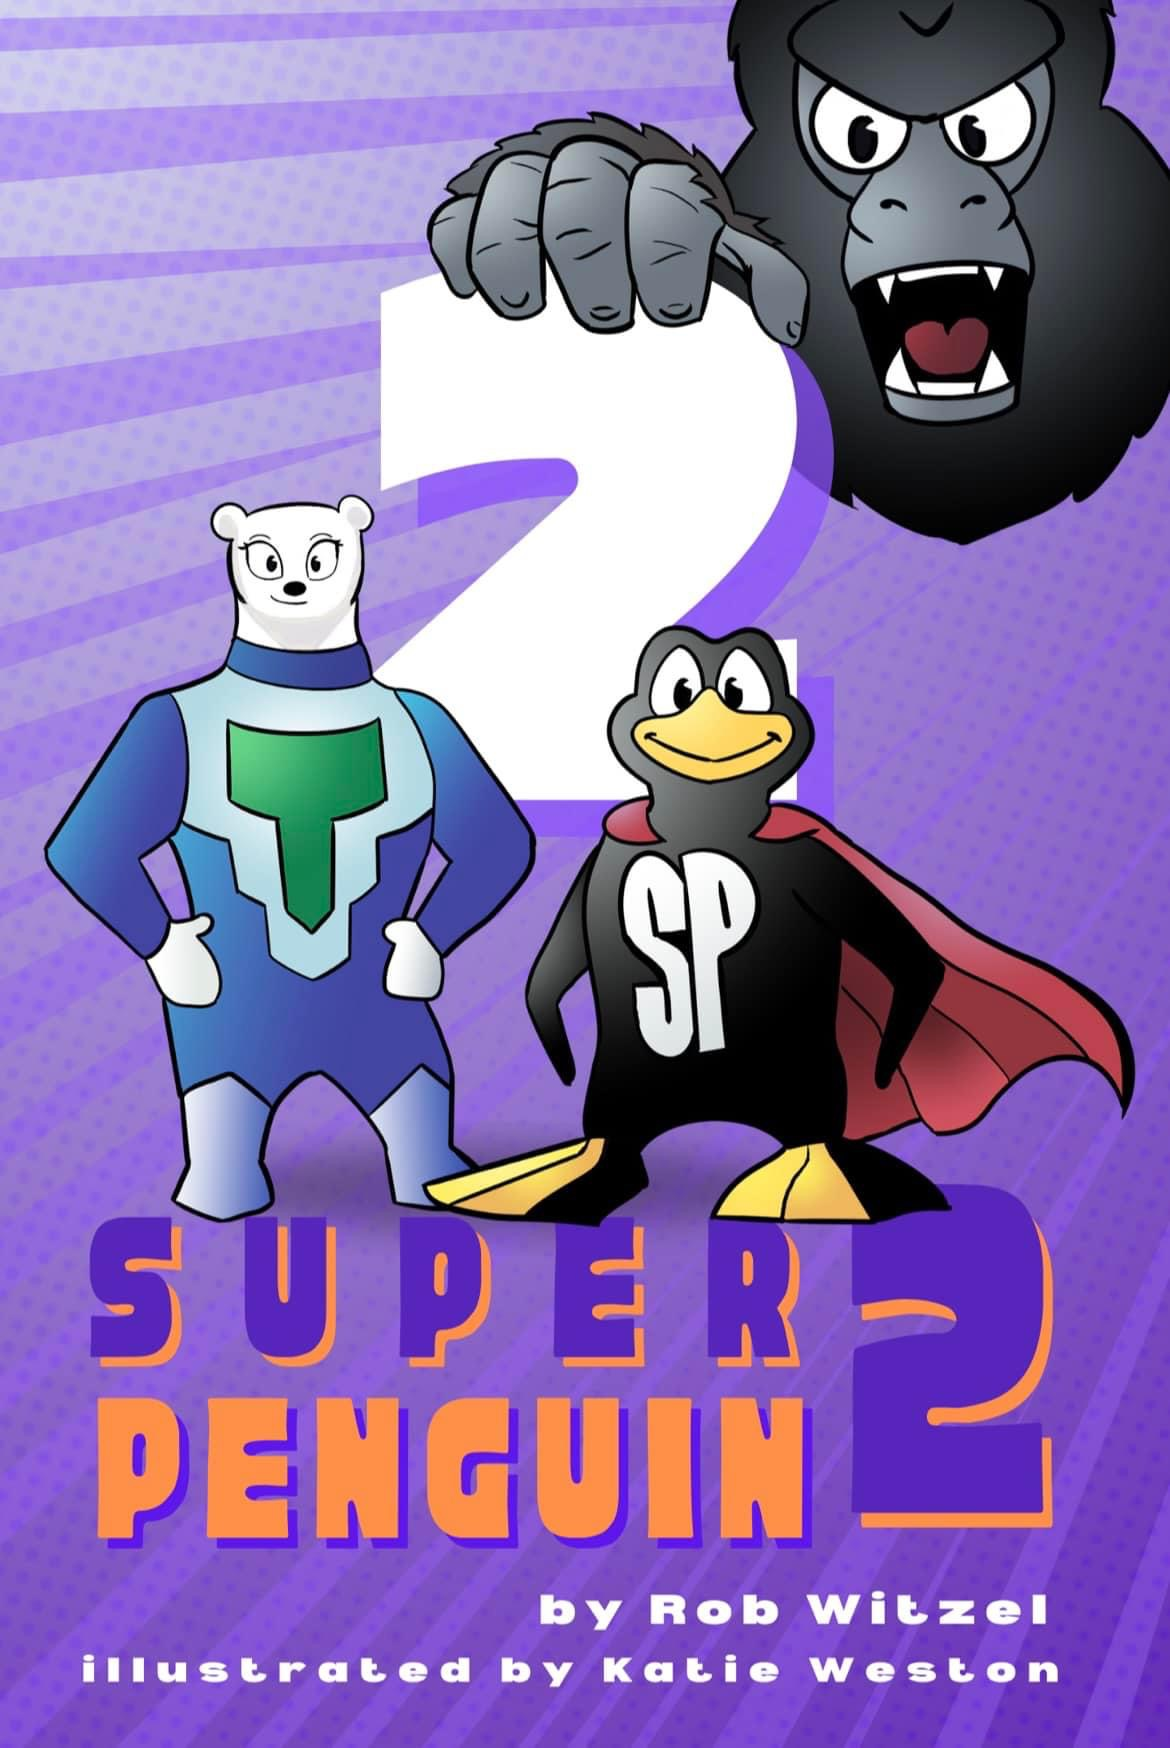 Direct Line / Super Penguin 2 by Rob Witzel